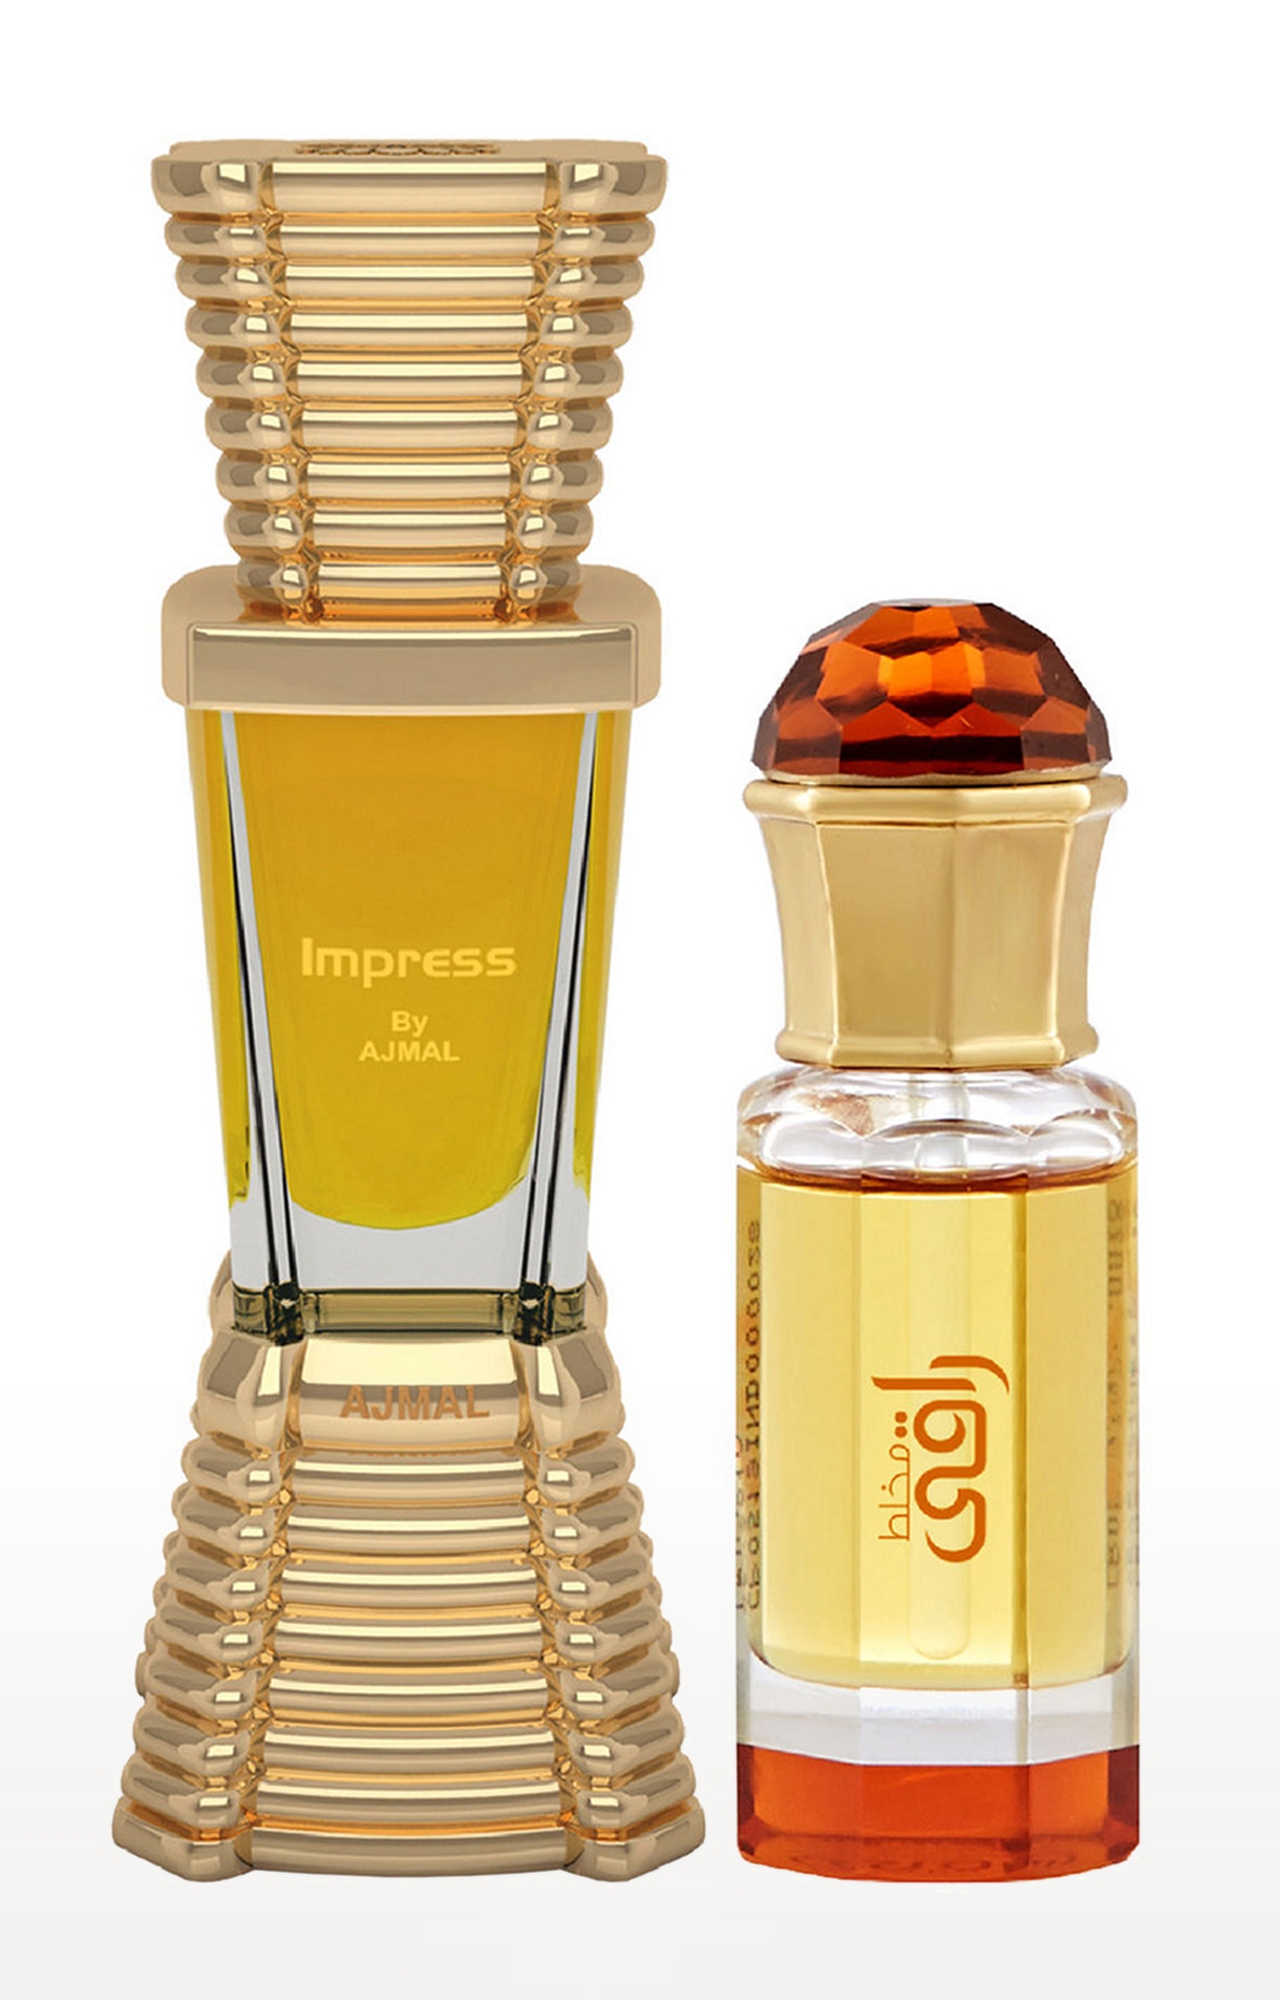 Ajmal | Ajmal Impress Concentrated Perfume Oil Alcohol-free Attar 10ml for Men and Mukhallat Raaqi Concentrated Perfume Oil Alcohol-free Attar 10ml for Unisex